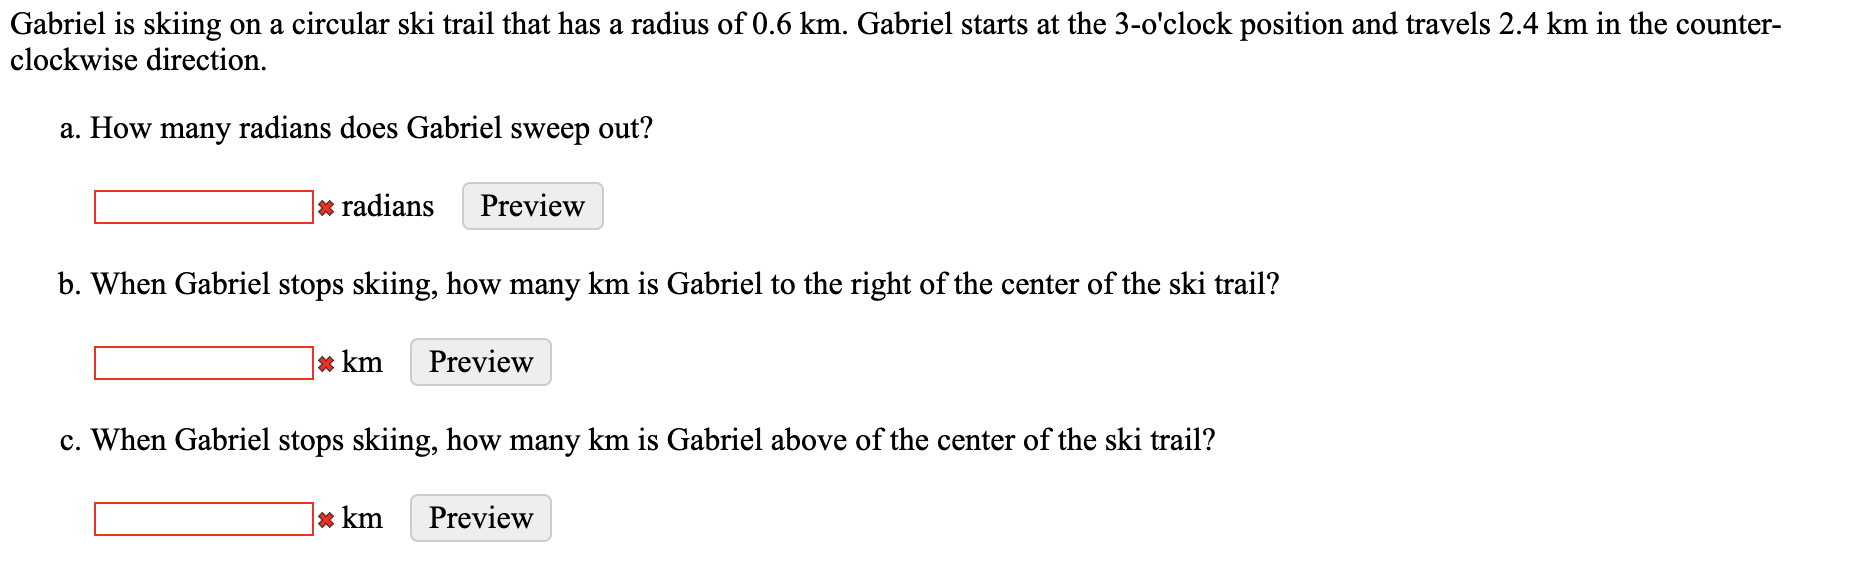 Gabriel is skiing on a circular ski trail that has a radius of 0.6 km. Gabriel starts at the 3-o'clock position and travels 2.4 km in the counter-
clockwise direction.
a. How many radians does Gabriel sweep out?
* radians
Preview
b. When Gabriel stops skiing, how many km is Gabriel to the right of the center of the ski trail?
* km
Preview
c. When Gabriel stops skiing, how many km is Gabriel above of the center of the ski trail?
* km
Preview
